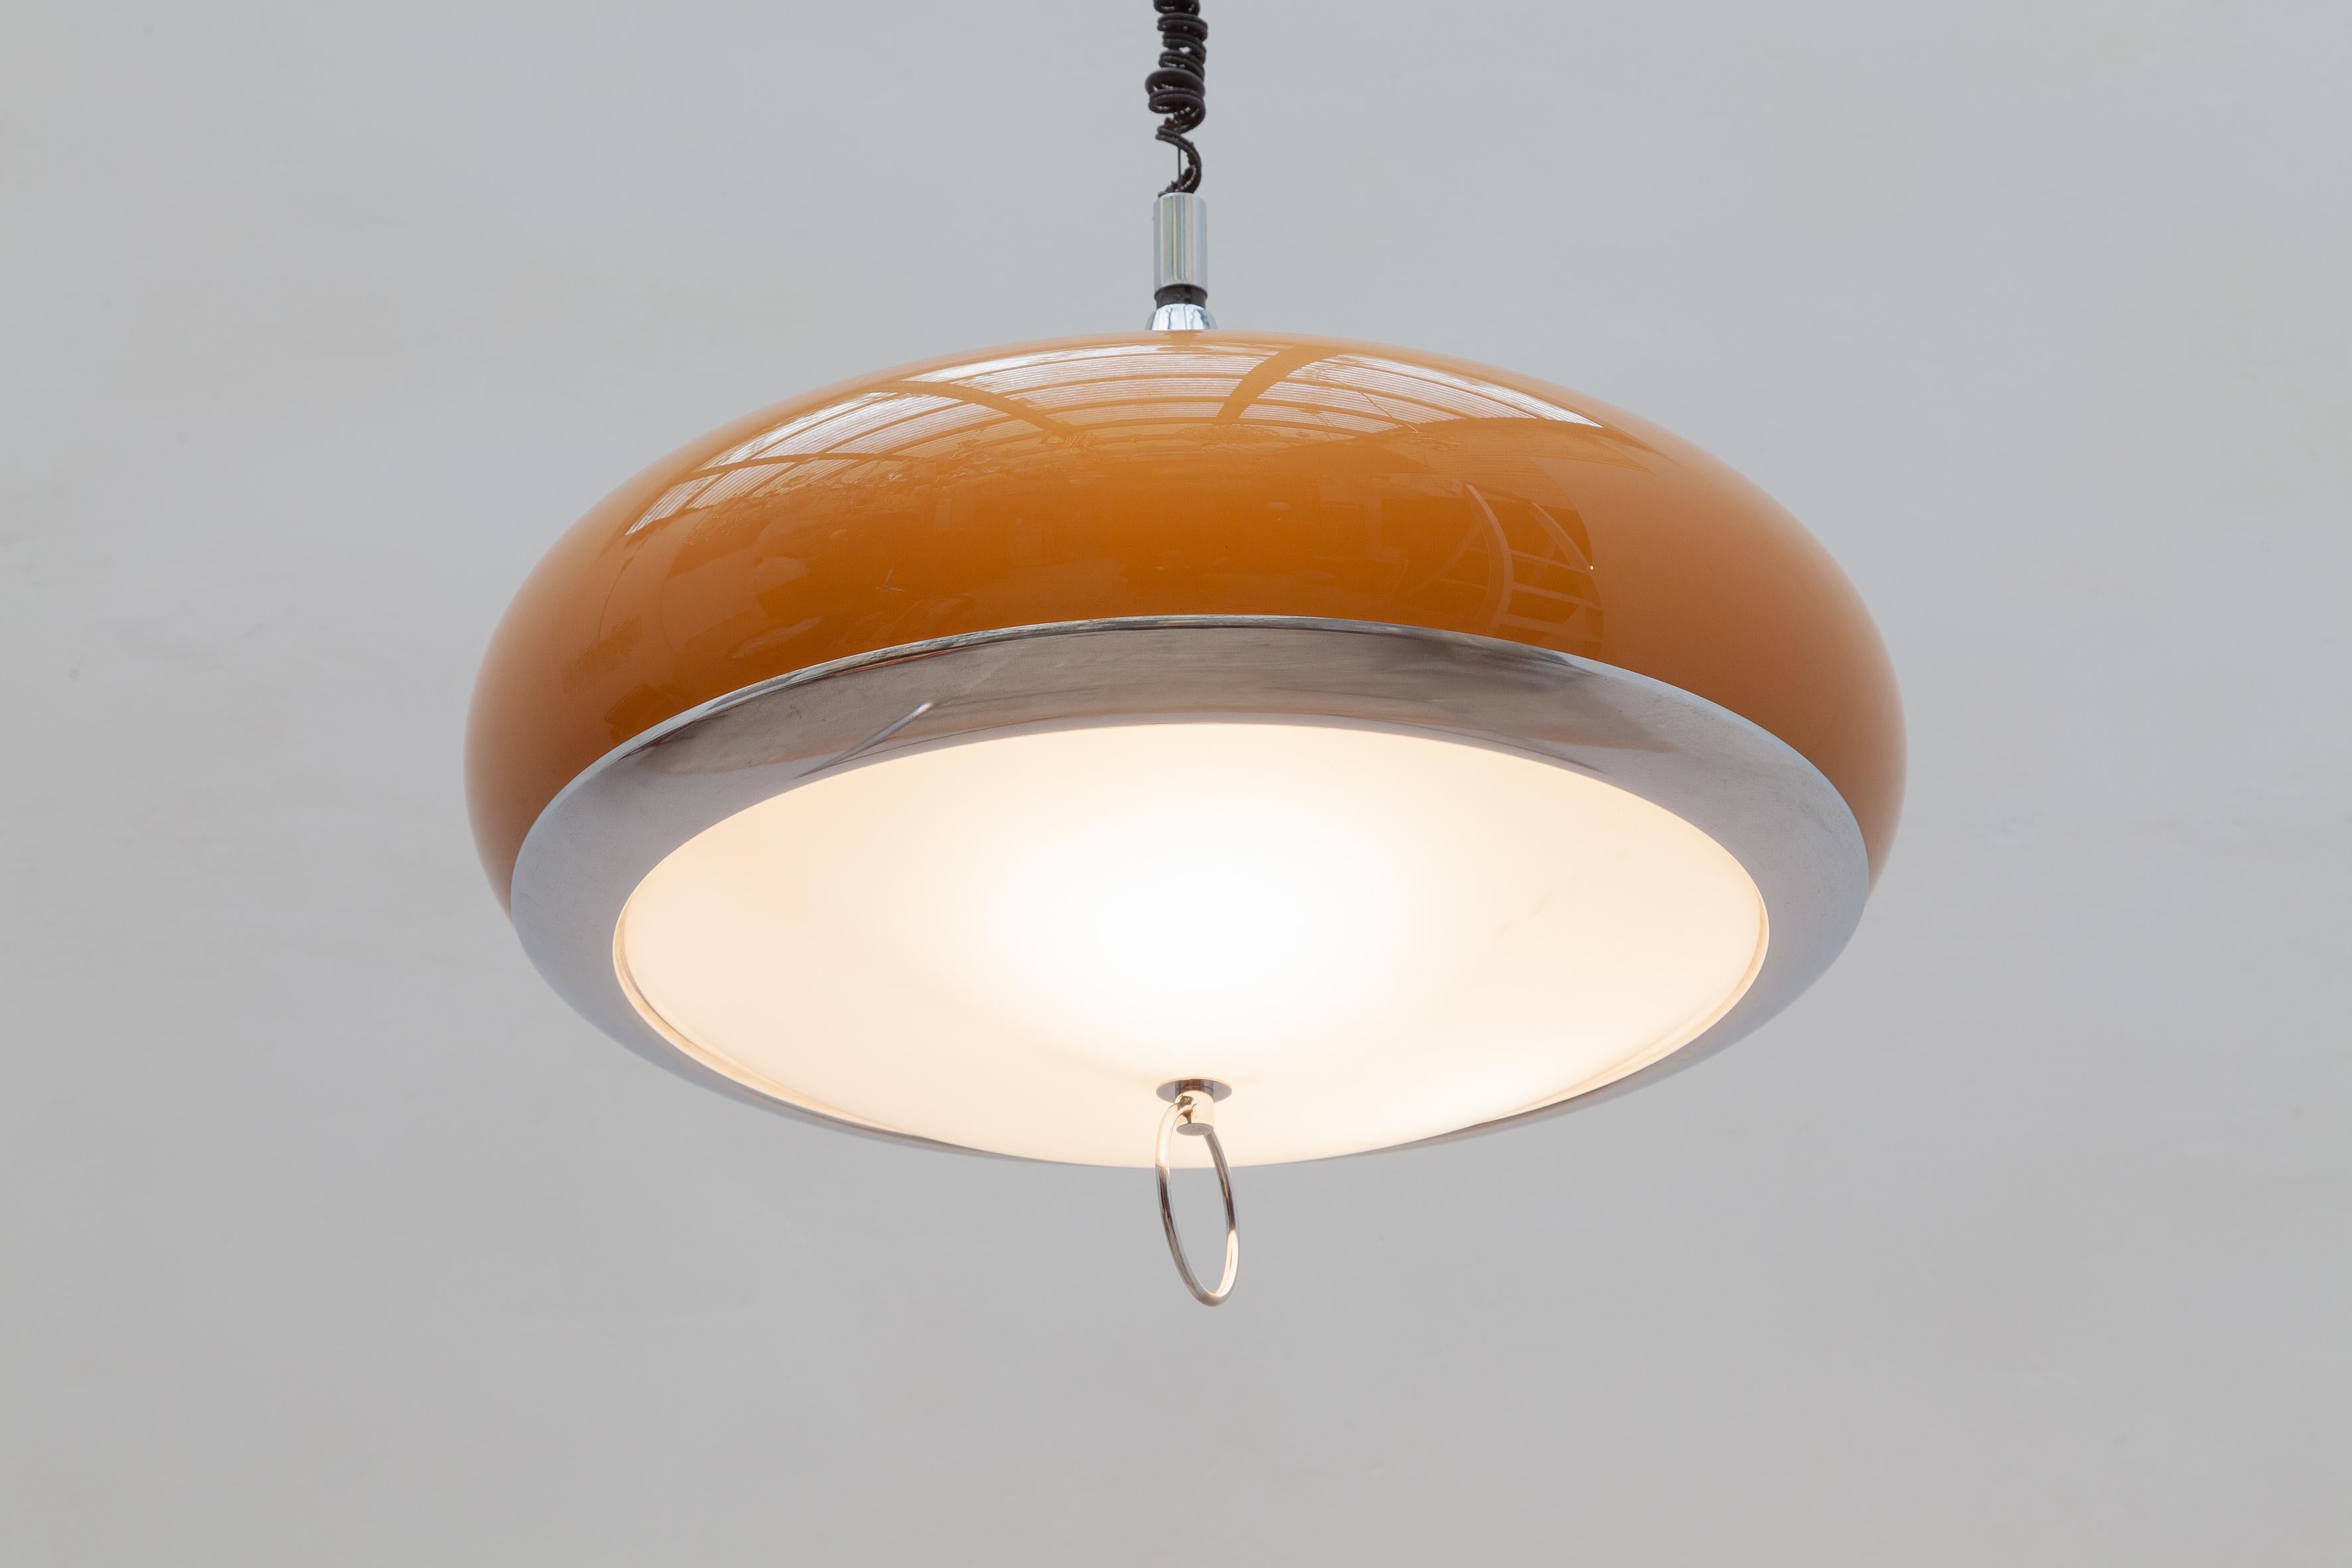 Guzzini pendant lamp. Vintage pendant lamp by Guzzini, Italy. Brown and white Perspex shade with chrome accents. The lamp can be raised and lowered by pulling on the ring. Very good condition. Dimensions: Shade: 60 W x 60 H x 60 D cm
Cord drop